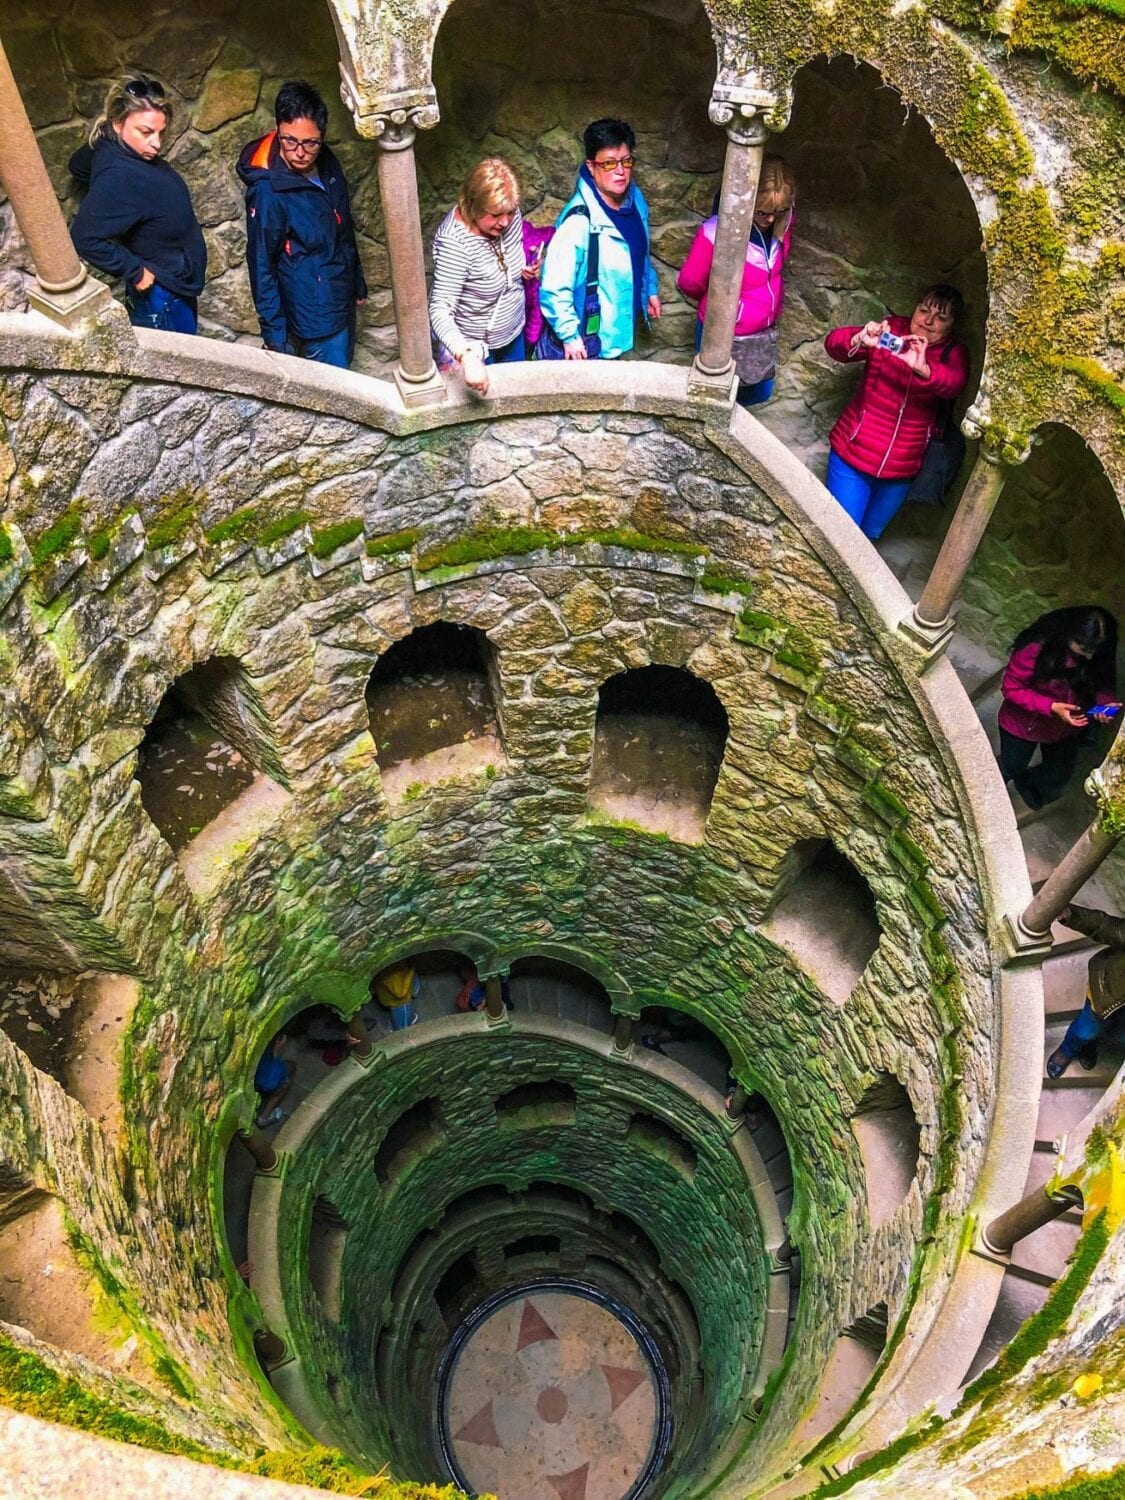 how to tour sintra